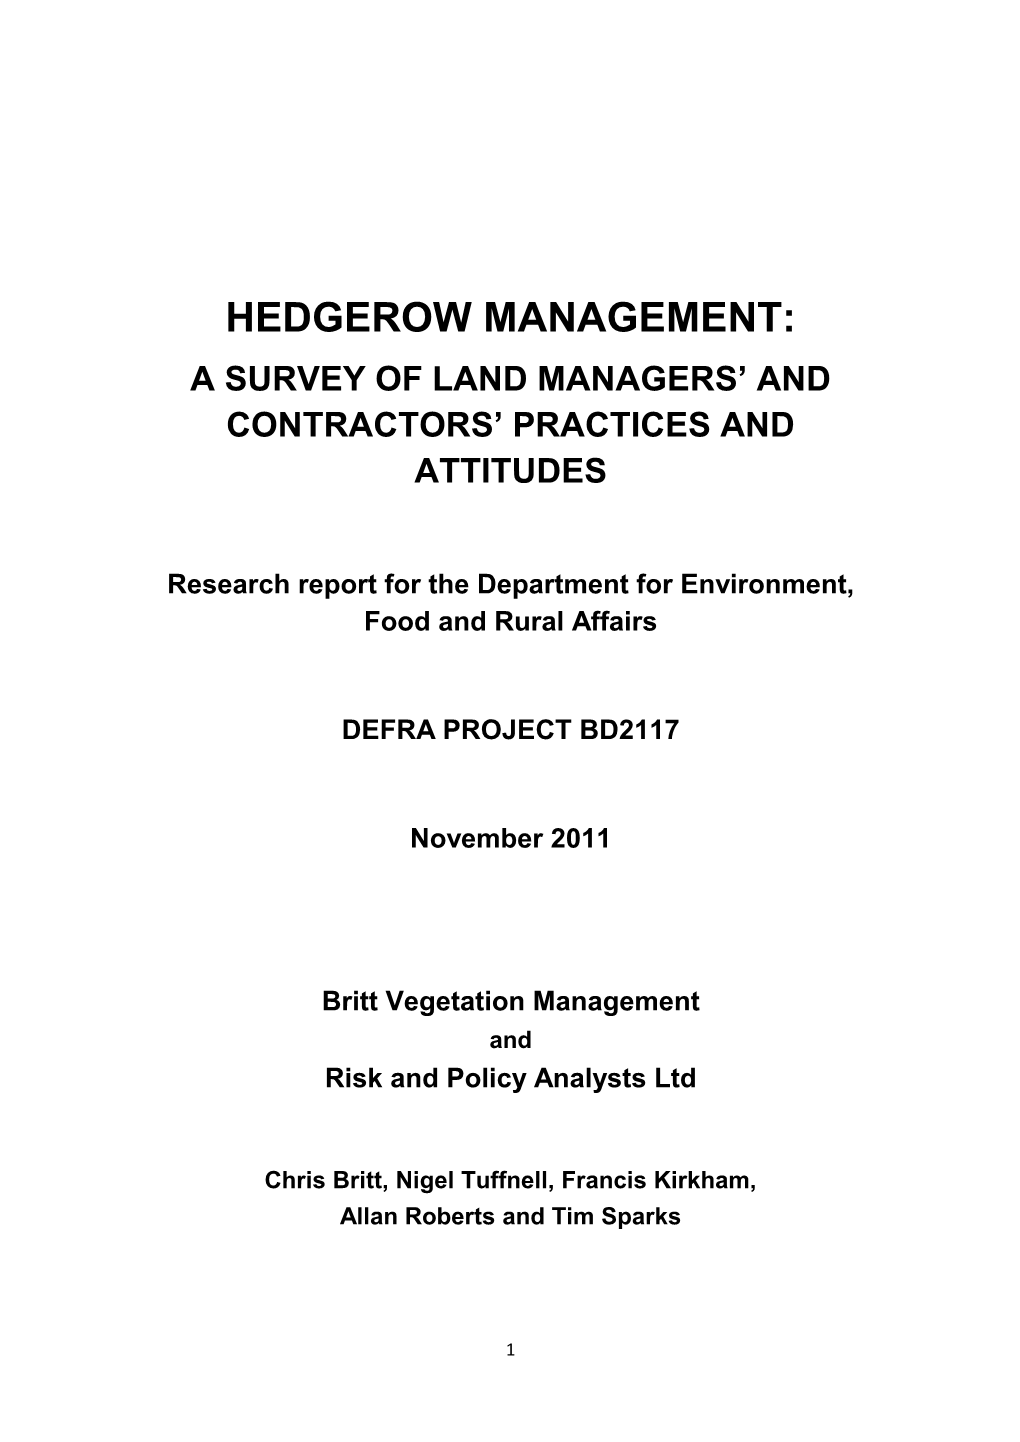 Hedgerow Management: a Survey of Land Managers’ and Contractors’ Practices and Attitudes